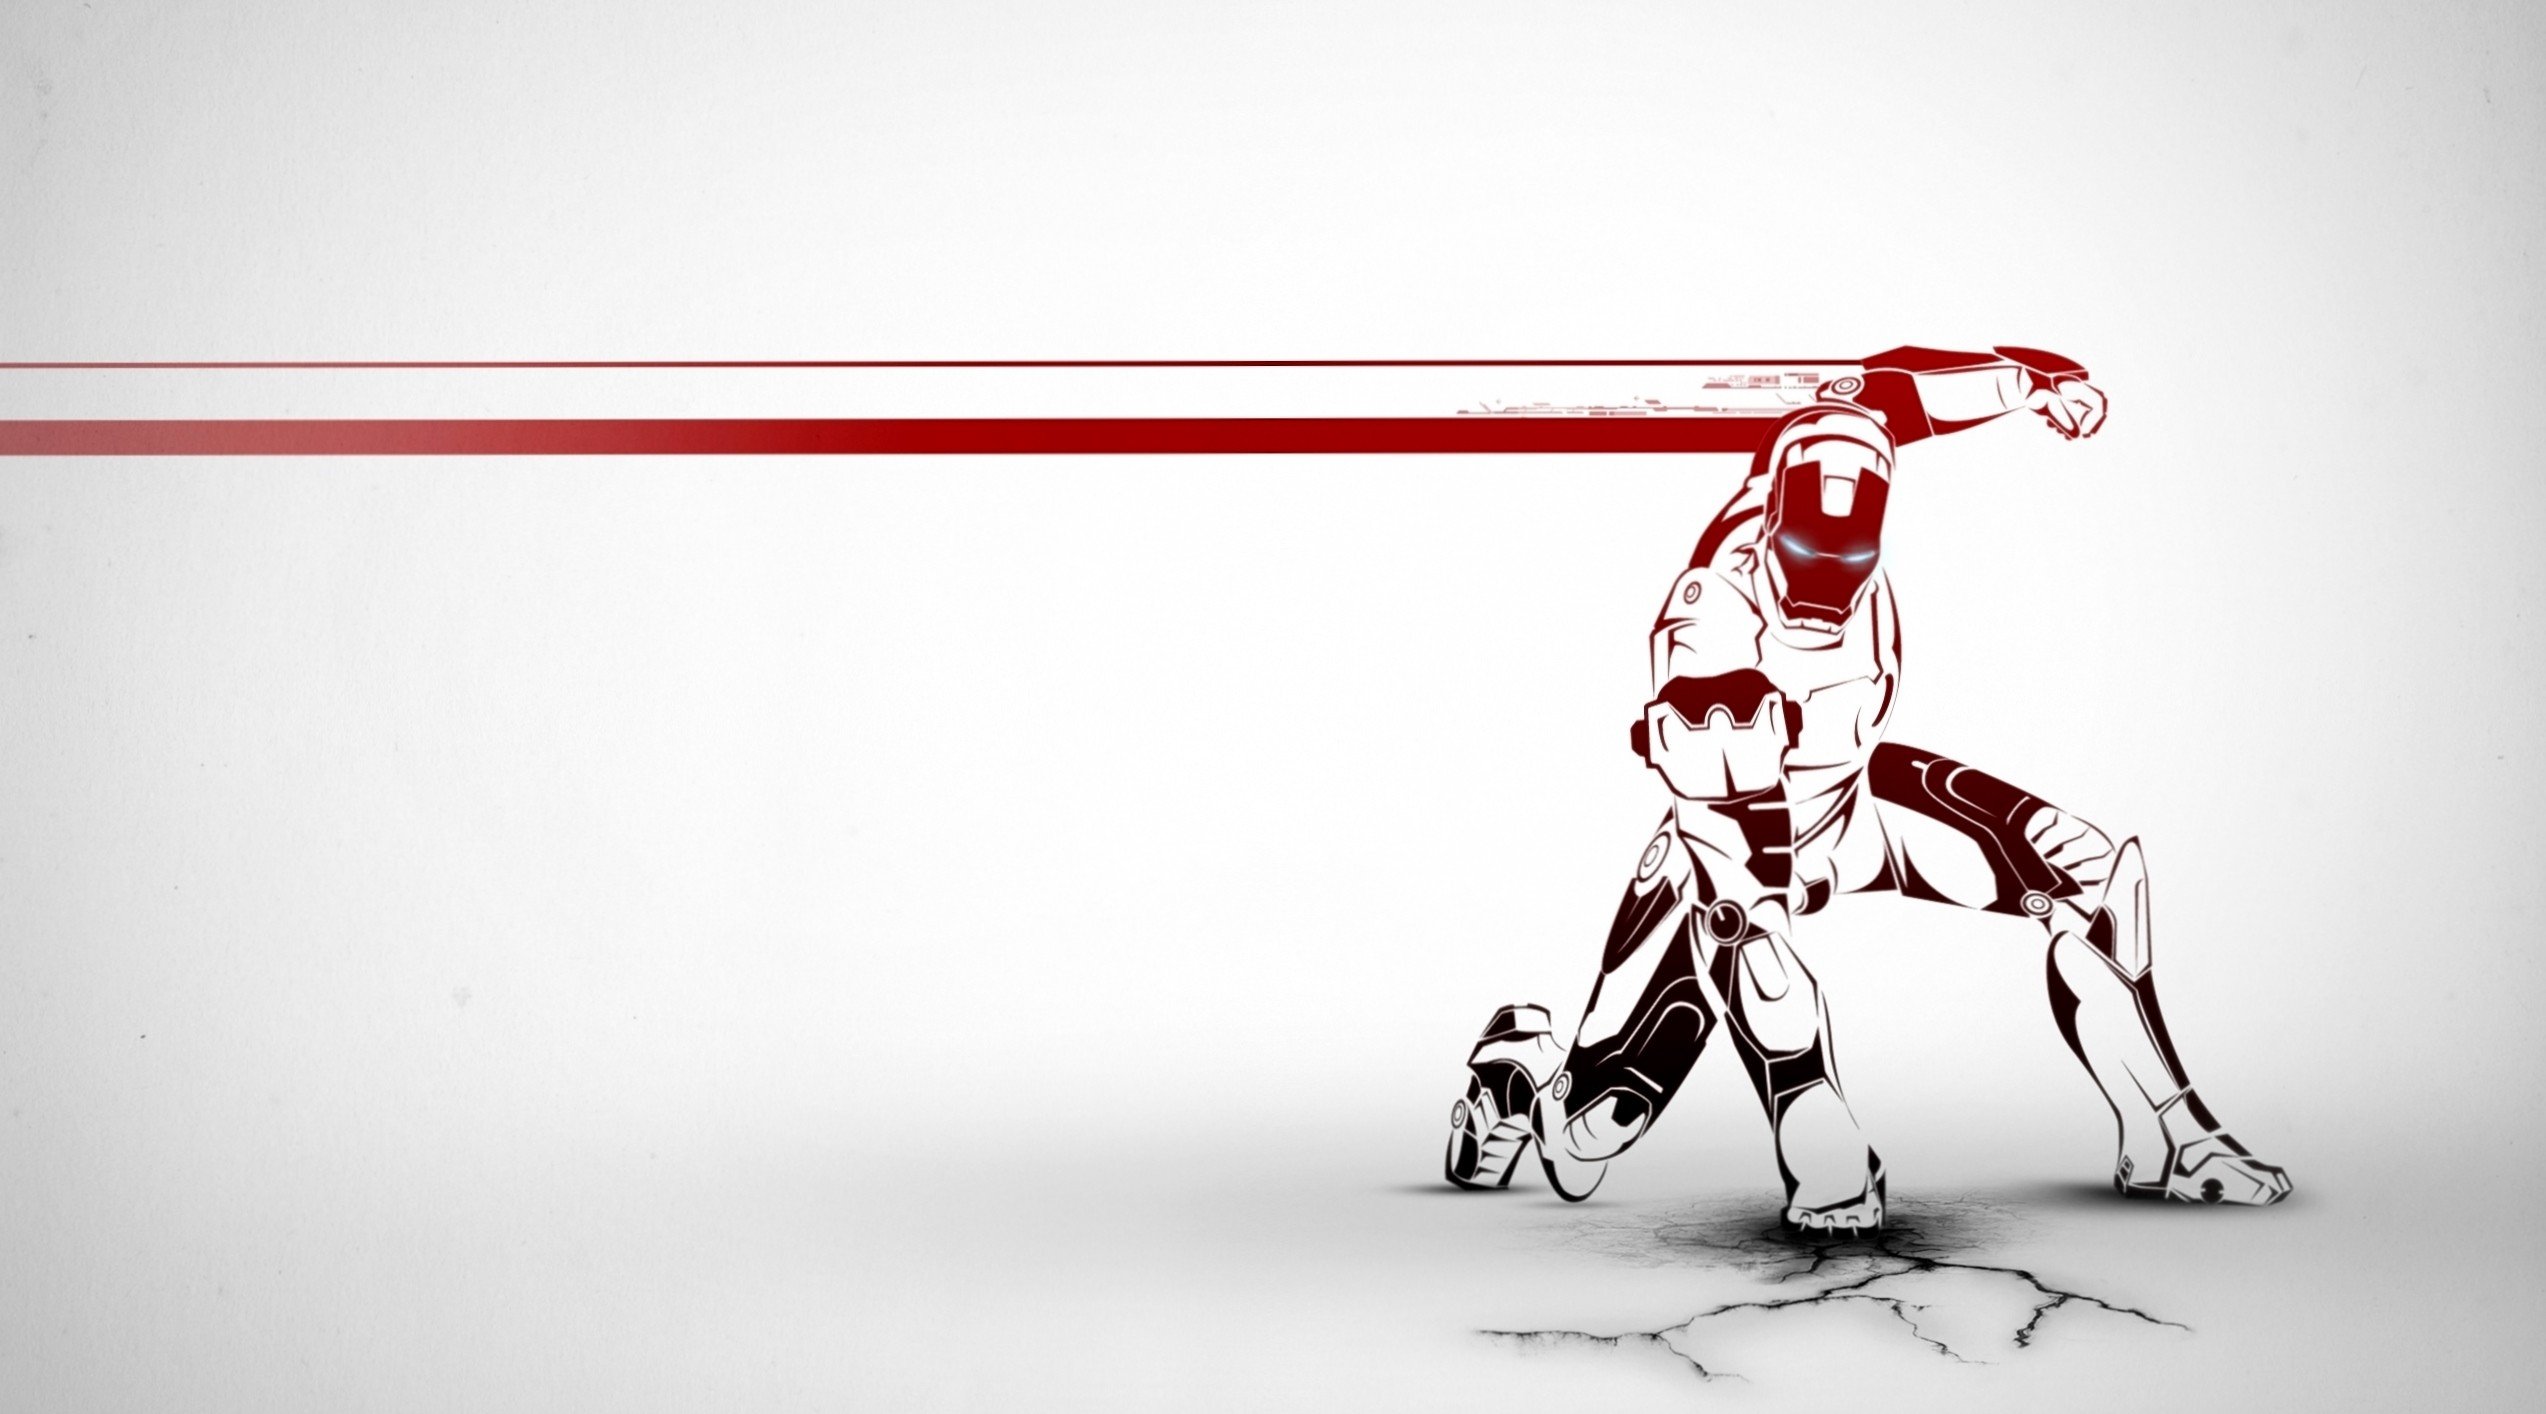 Wallpaper, drawing, white, illustration, red, Iron Man, Marvel Super Heroes, ART, line, sketch 2546x1414